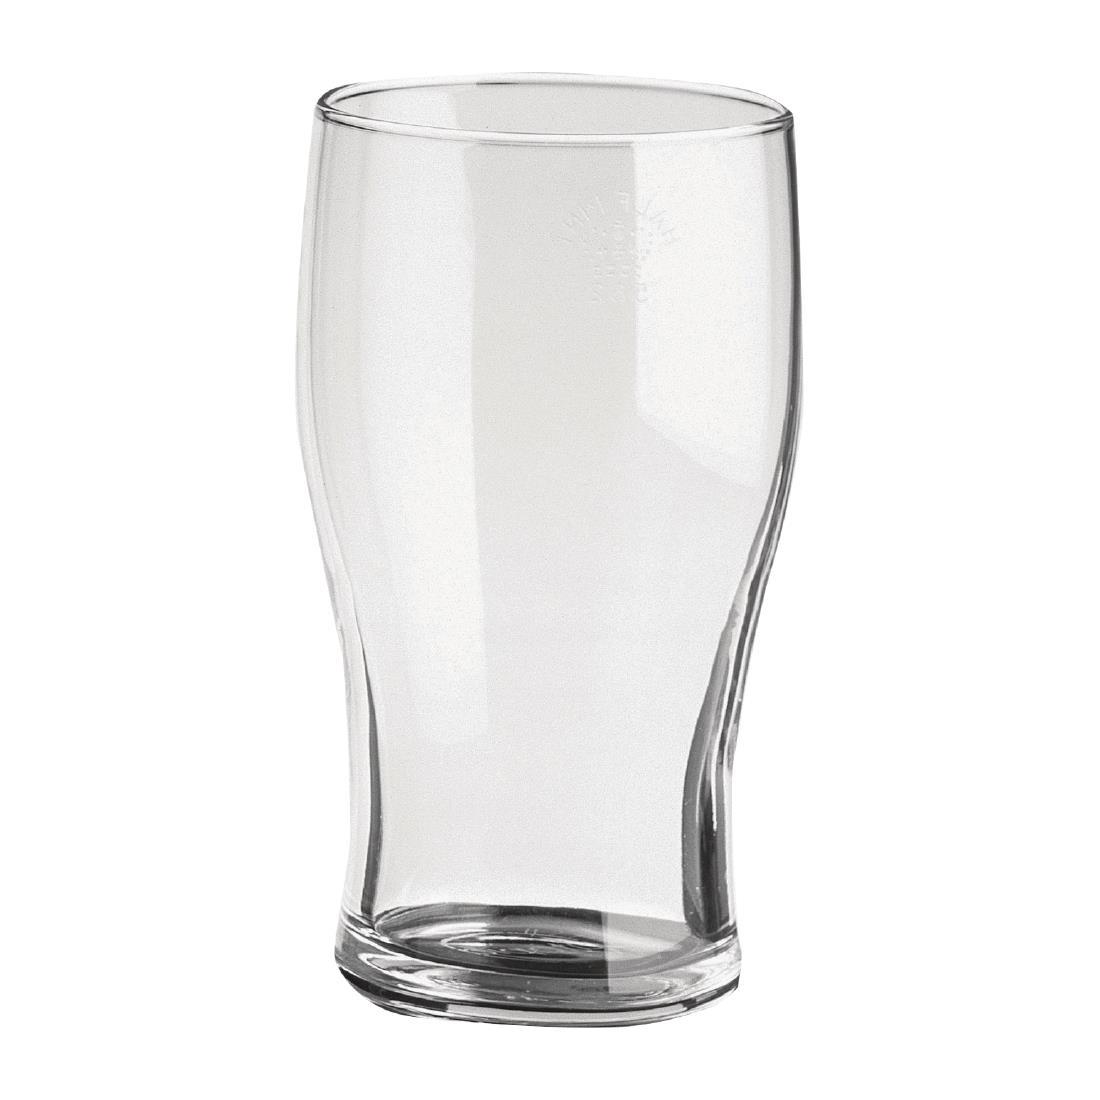 Utopia Tulip Beer Glasses 280ml CE Marked (Pack of 48) - CY340  - 1